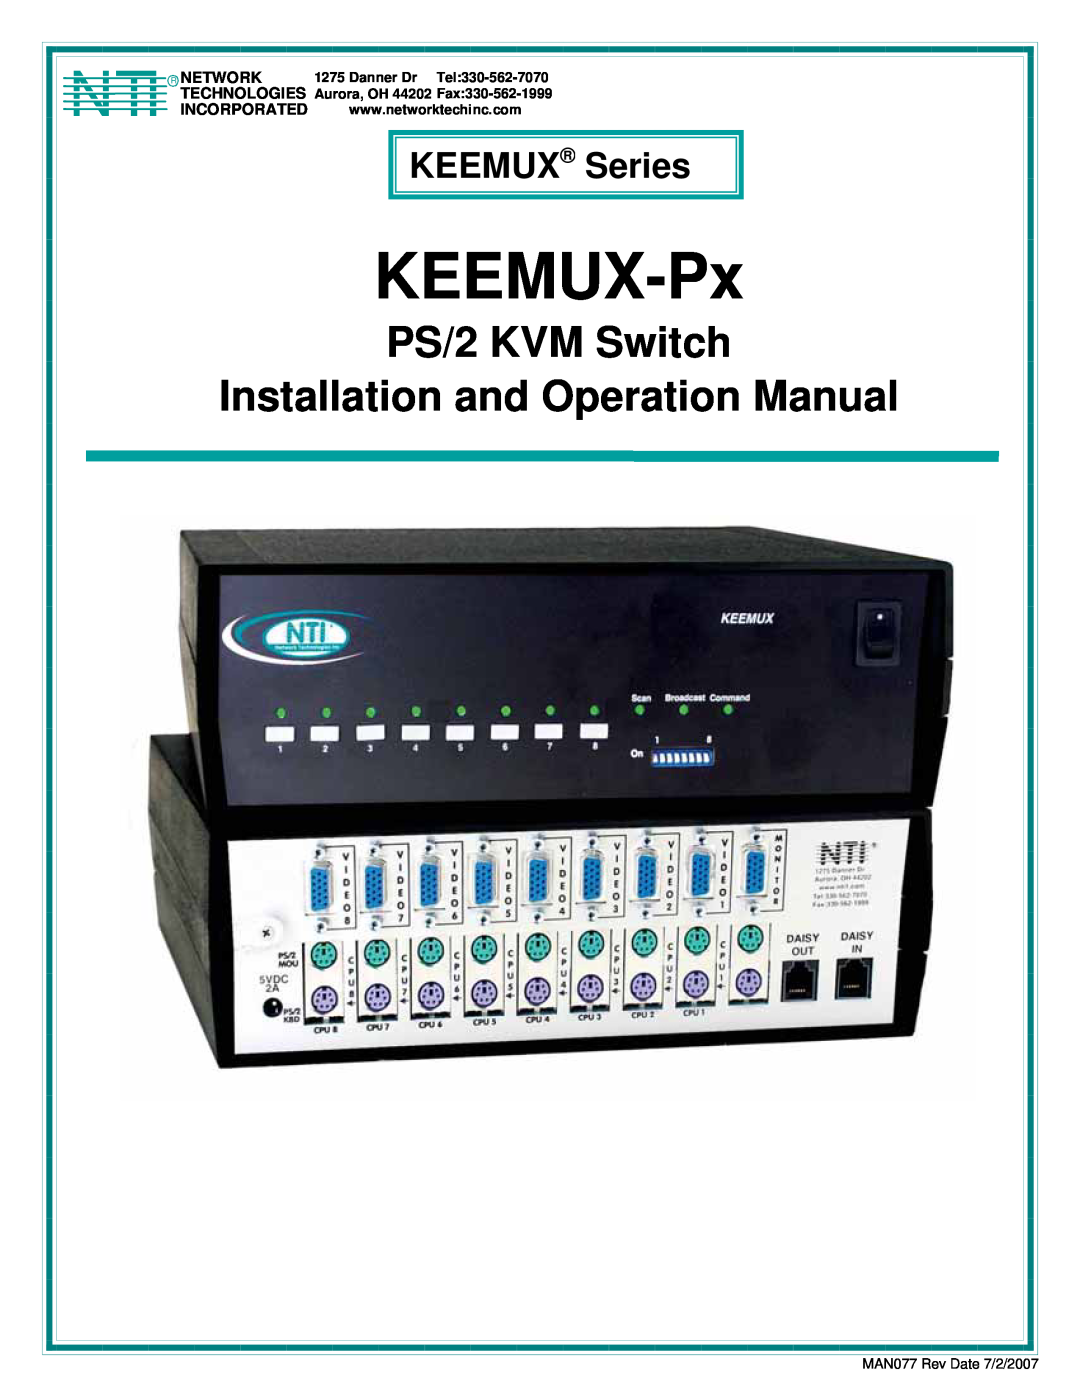 Network Technologies operation manual KEEMUX Series, R Network, Ntiincorporated, KEEMUX-Px, PS/2 KVM Switch 